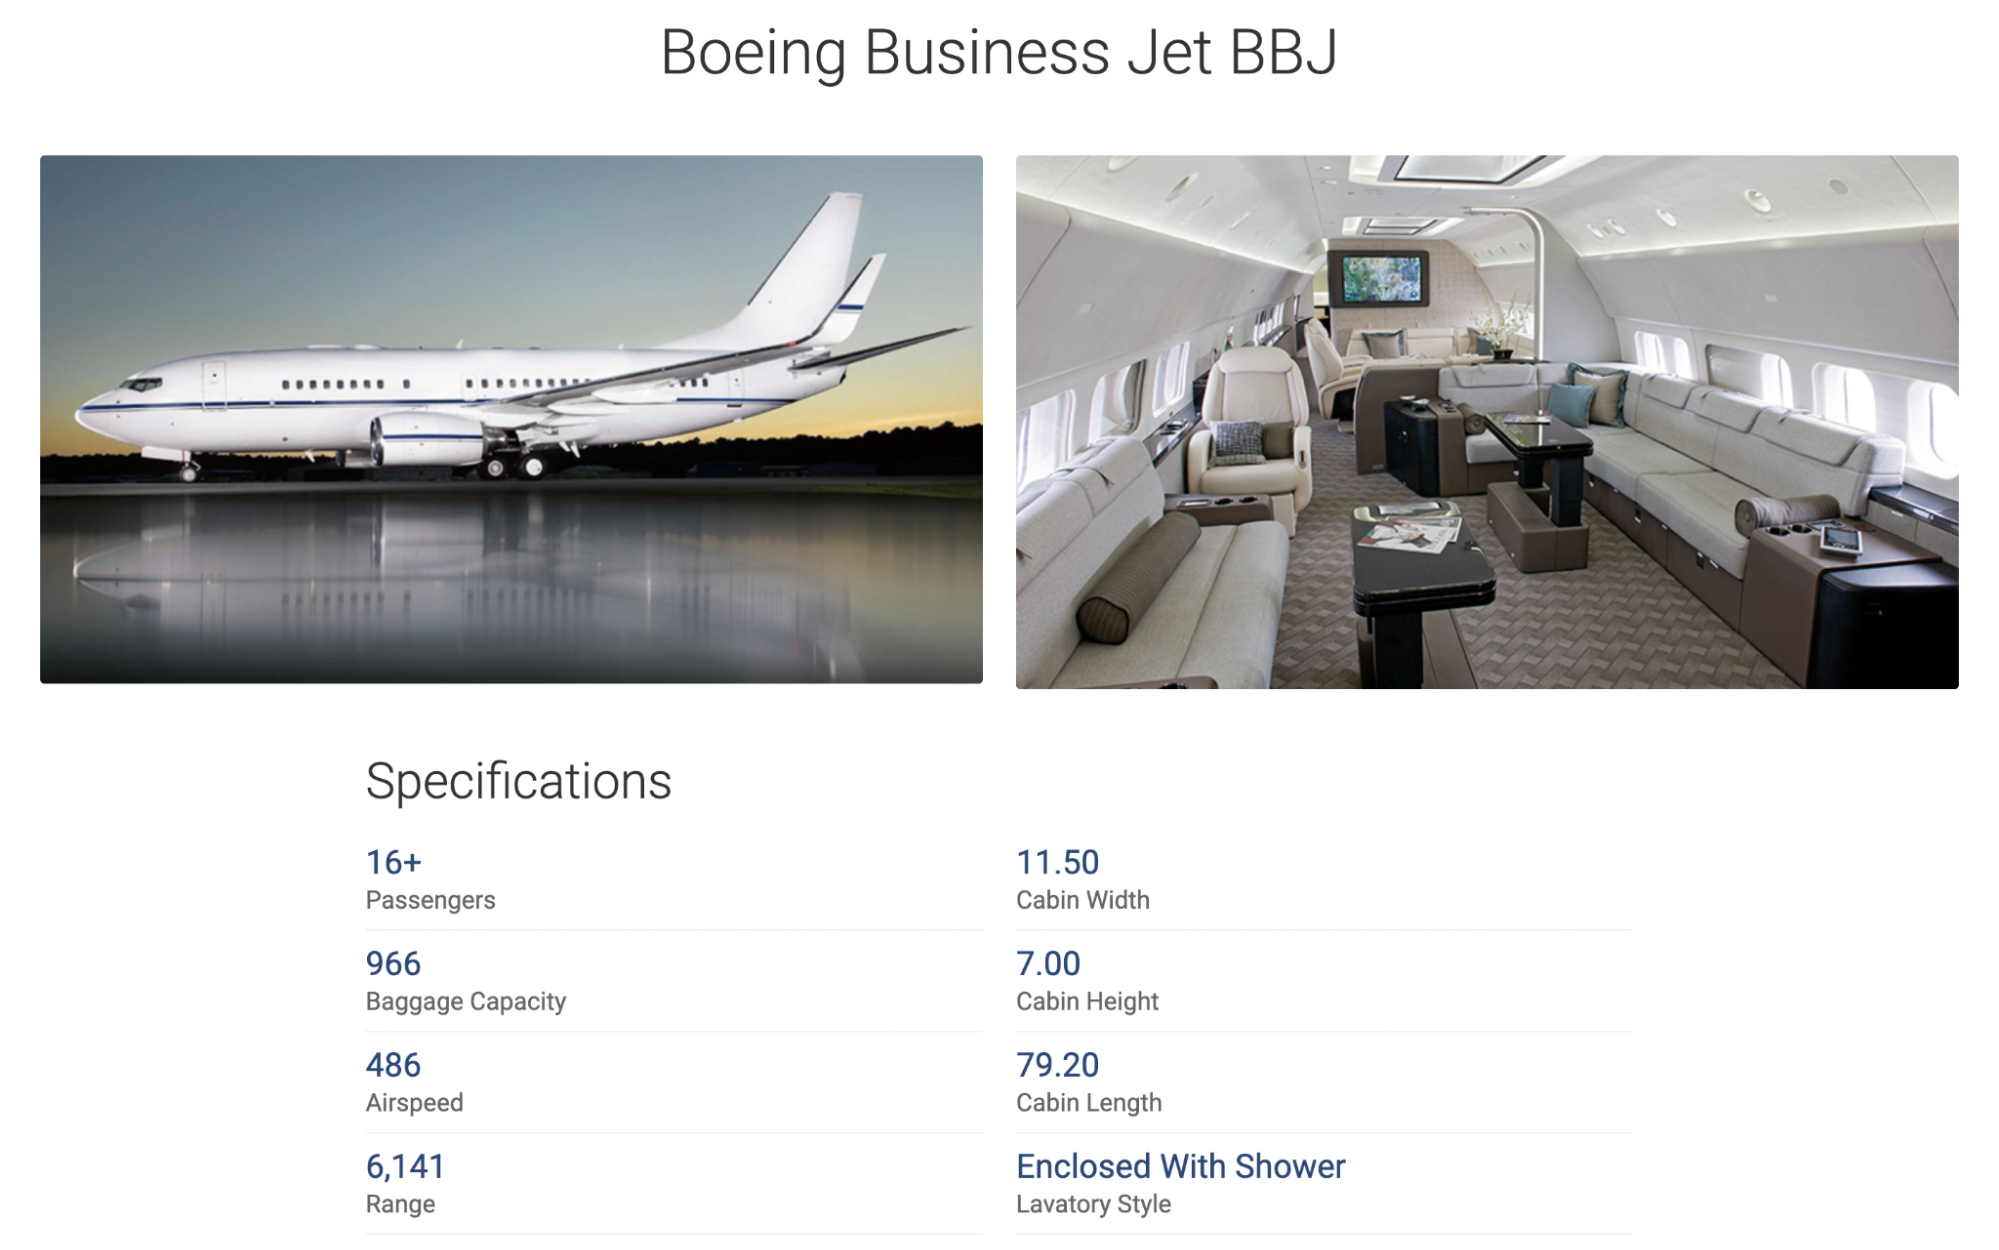 Boeing Business Jets offered by JetOptions for rent.